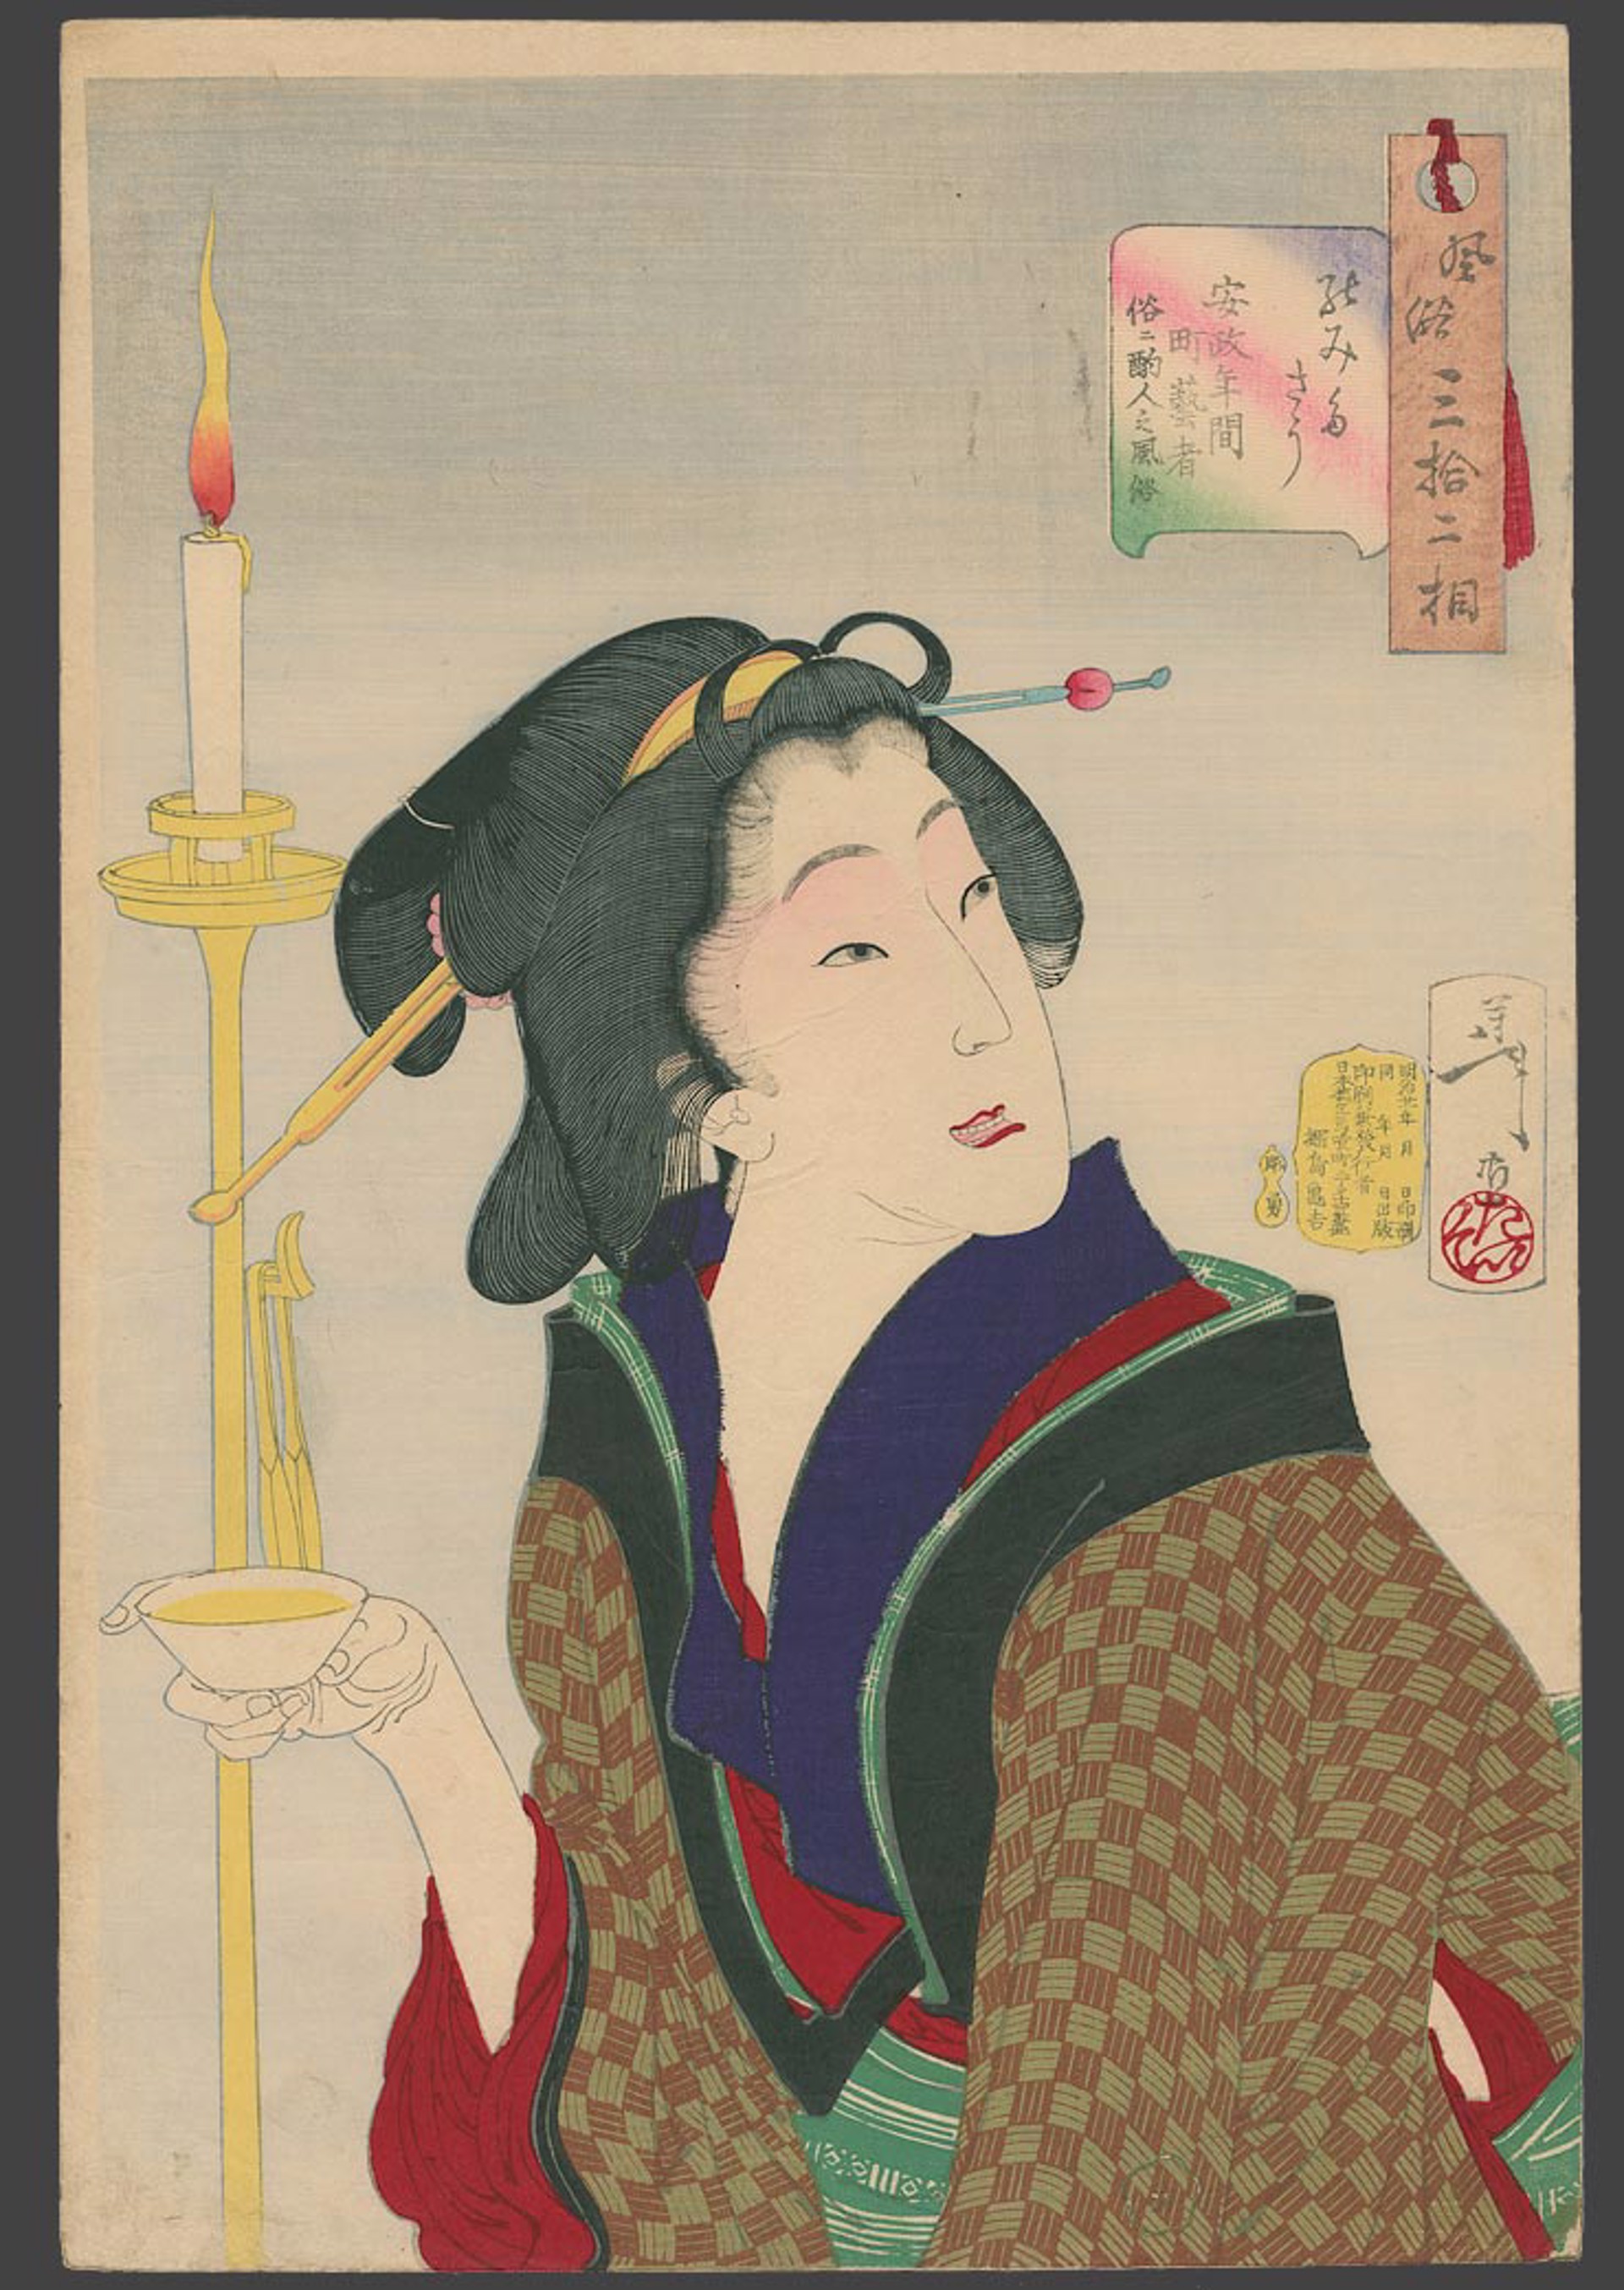 Looking as if she wants a drink: A town geisha, so called wine server, in the Ansei era (1854-60) 32 Aspects of Women by Yoshitoshi